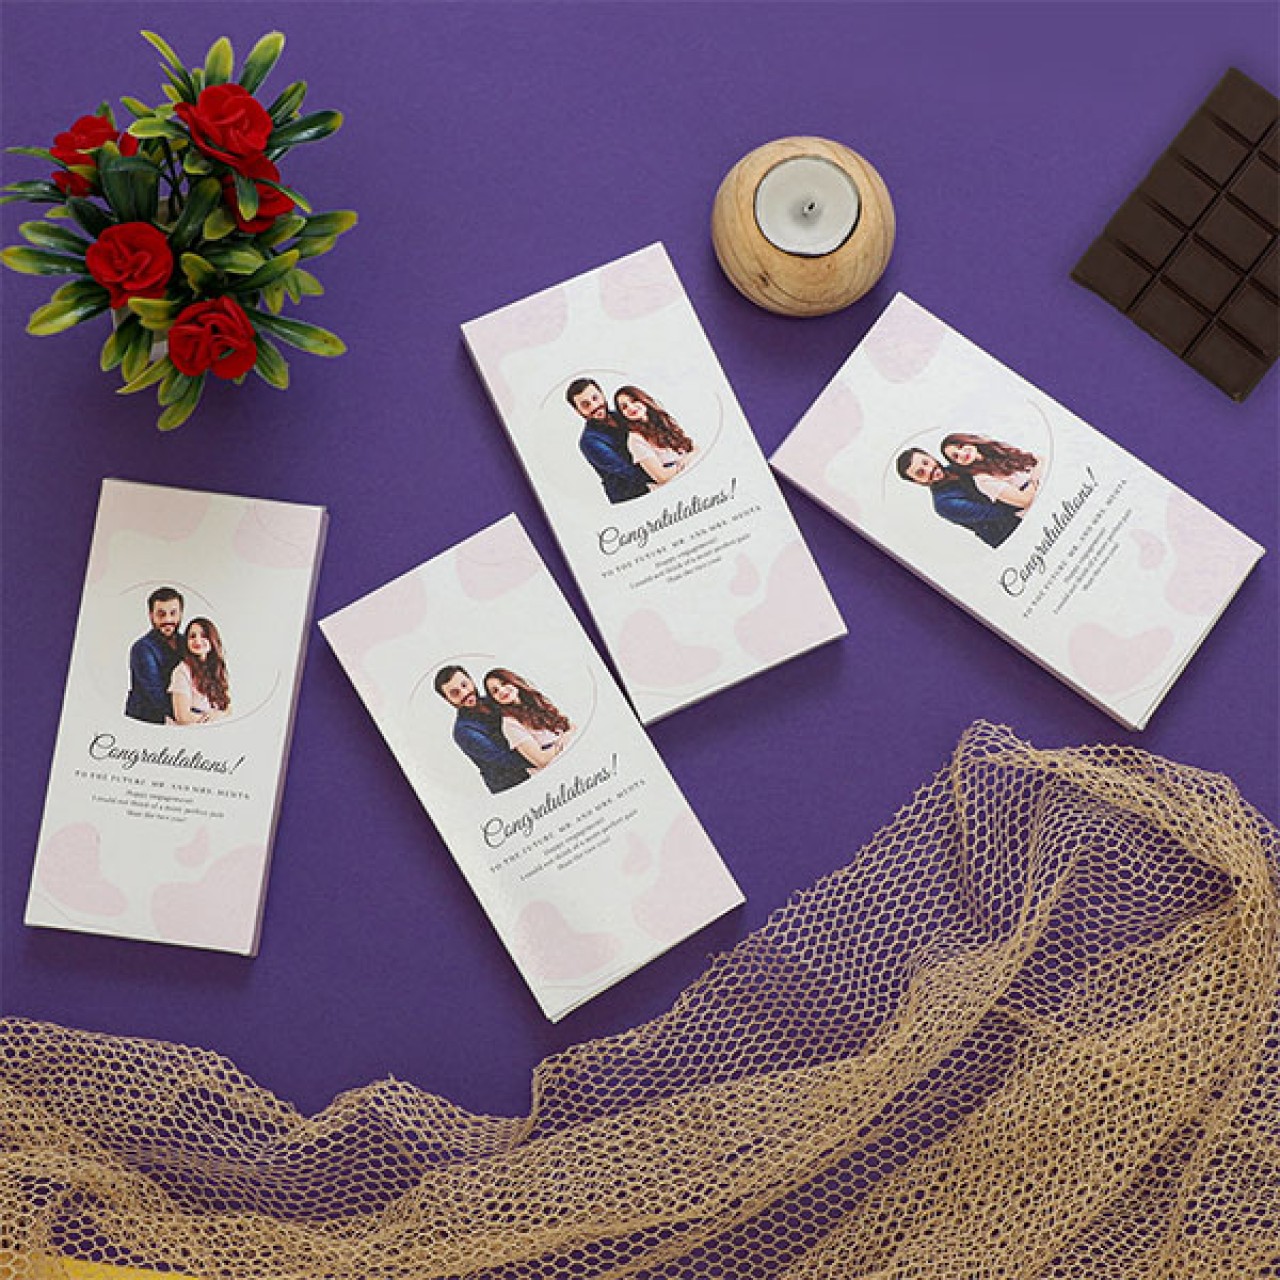 Personalized Bar Chocolates For Engagement